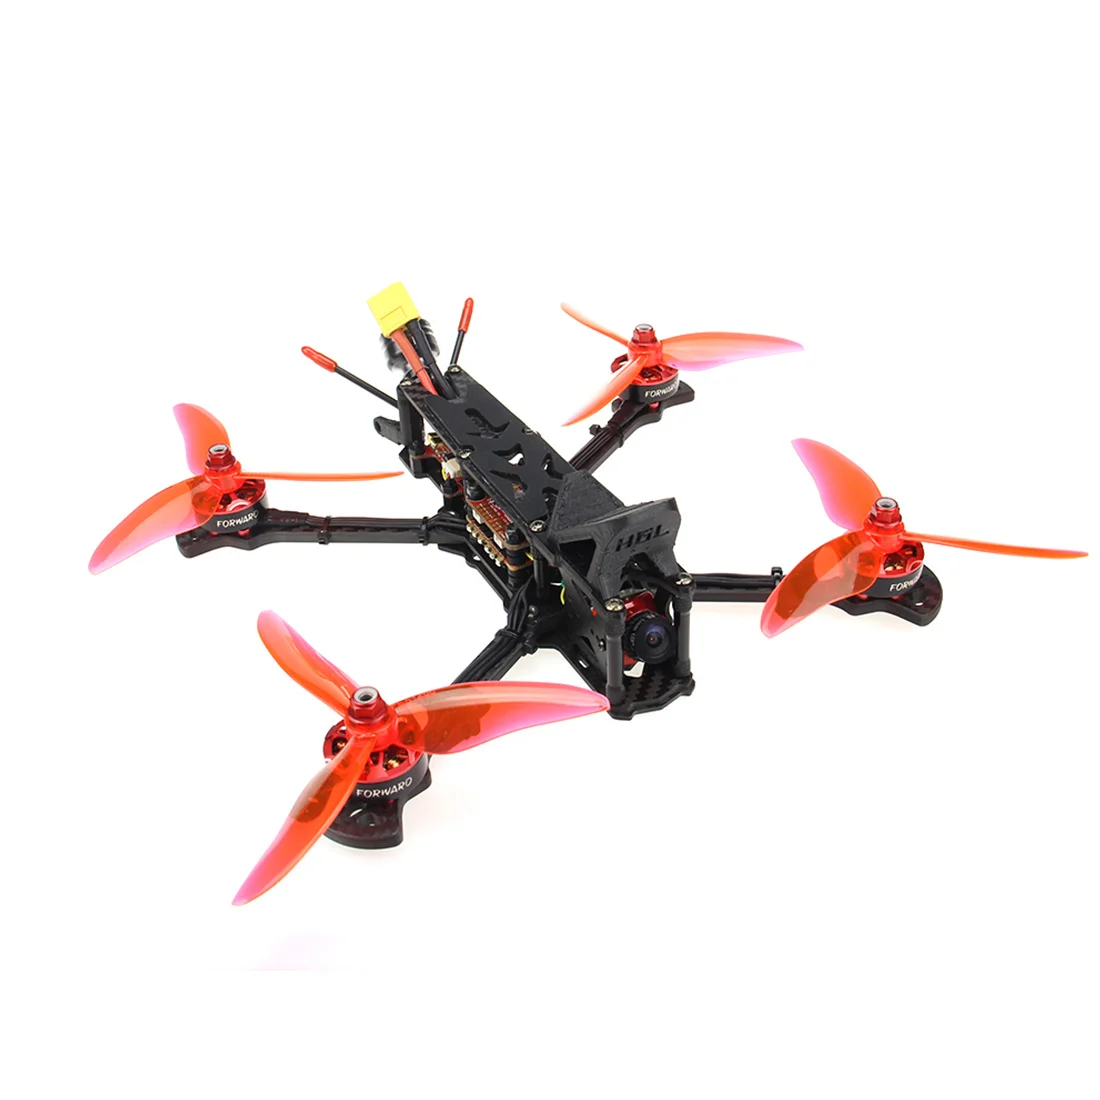 HGLRC Sector5 V2 226 мм FPV Racer Drone PNP/BNF w/F7 60A 4в1 ESC 2306 мотор 1600KV 6 S/2450KV 4S AURORA V2 FPV камера 1200TVL